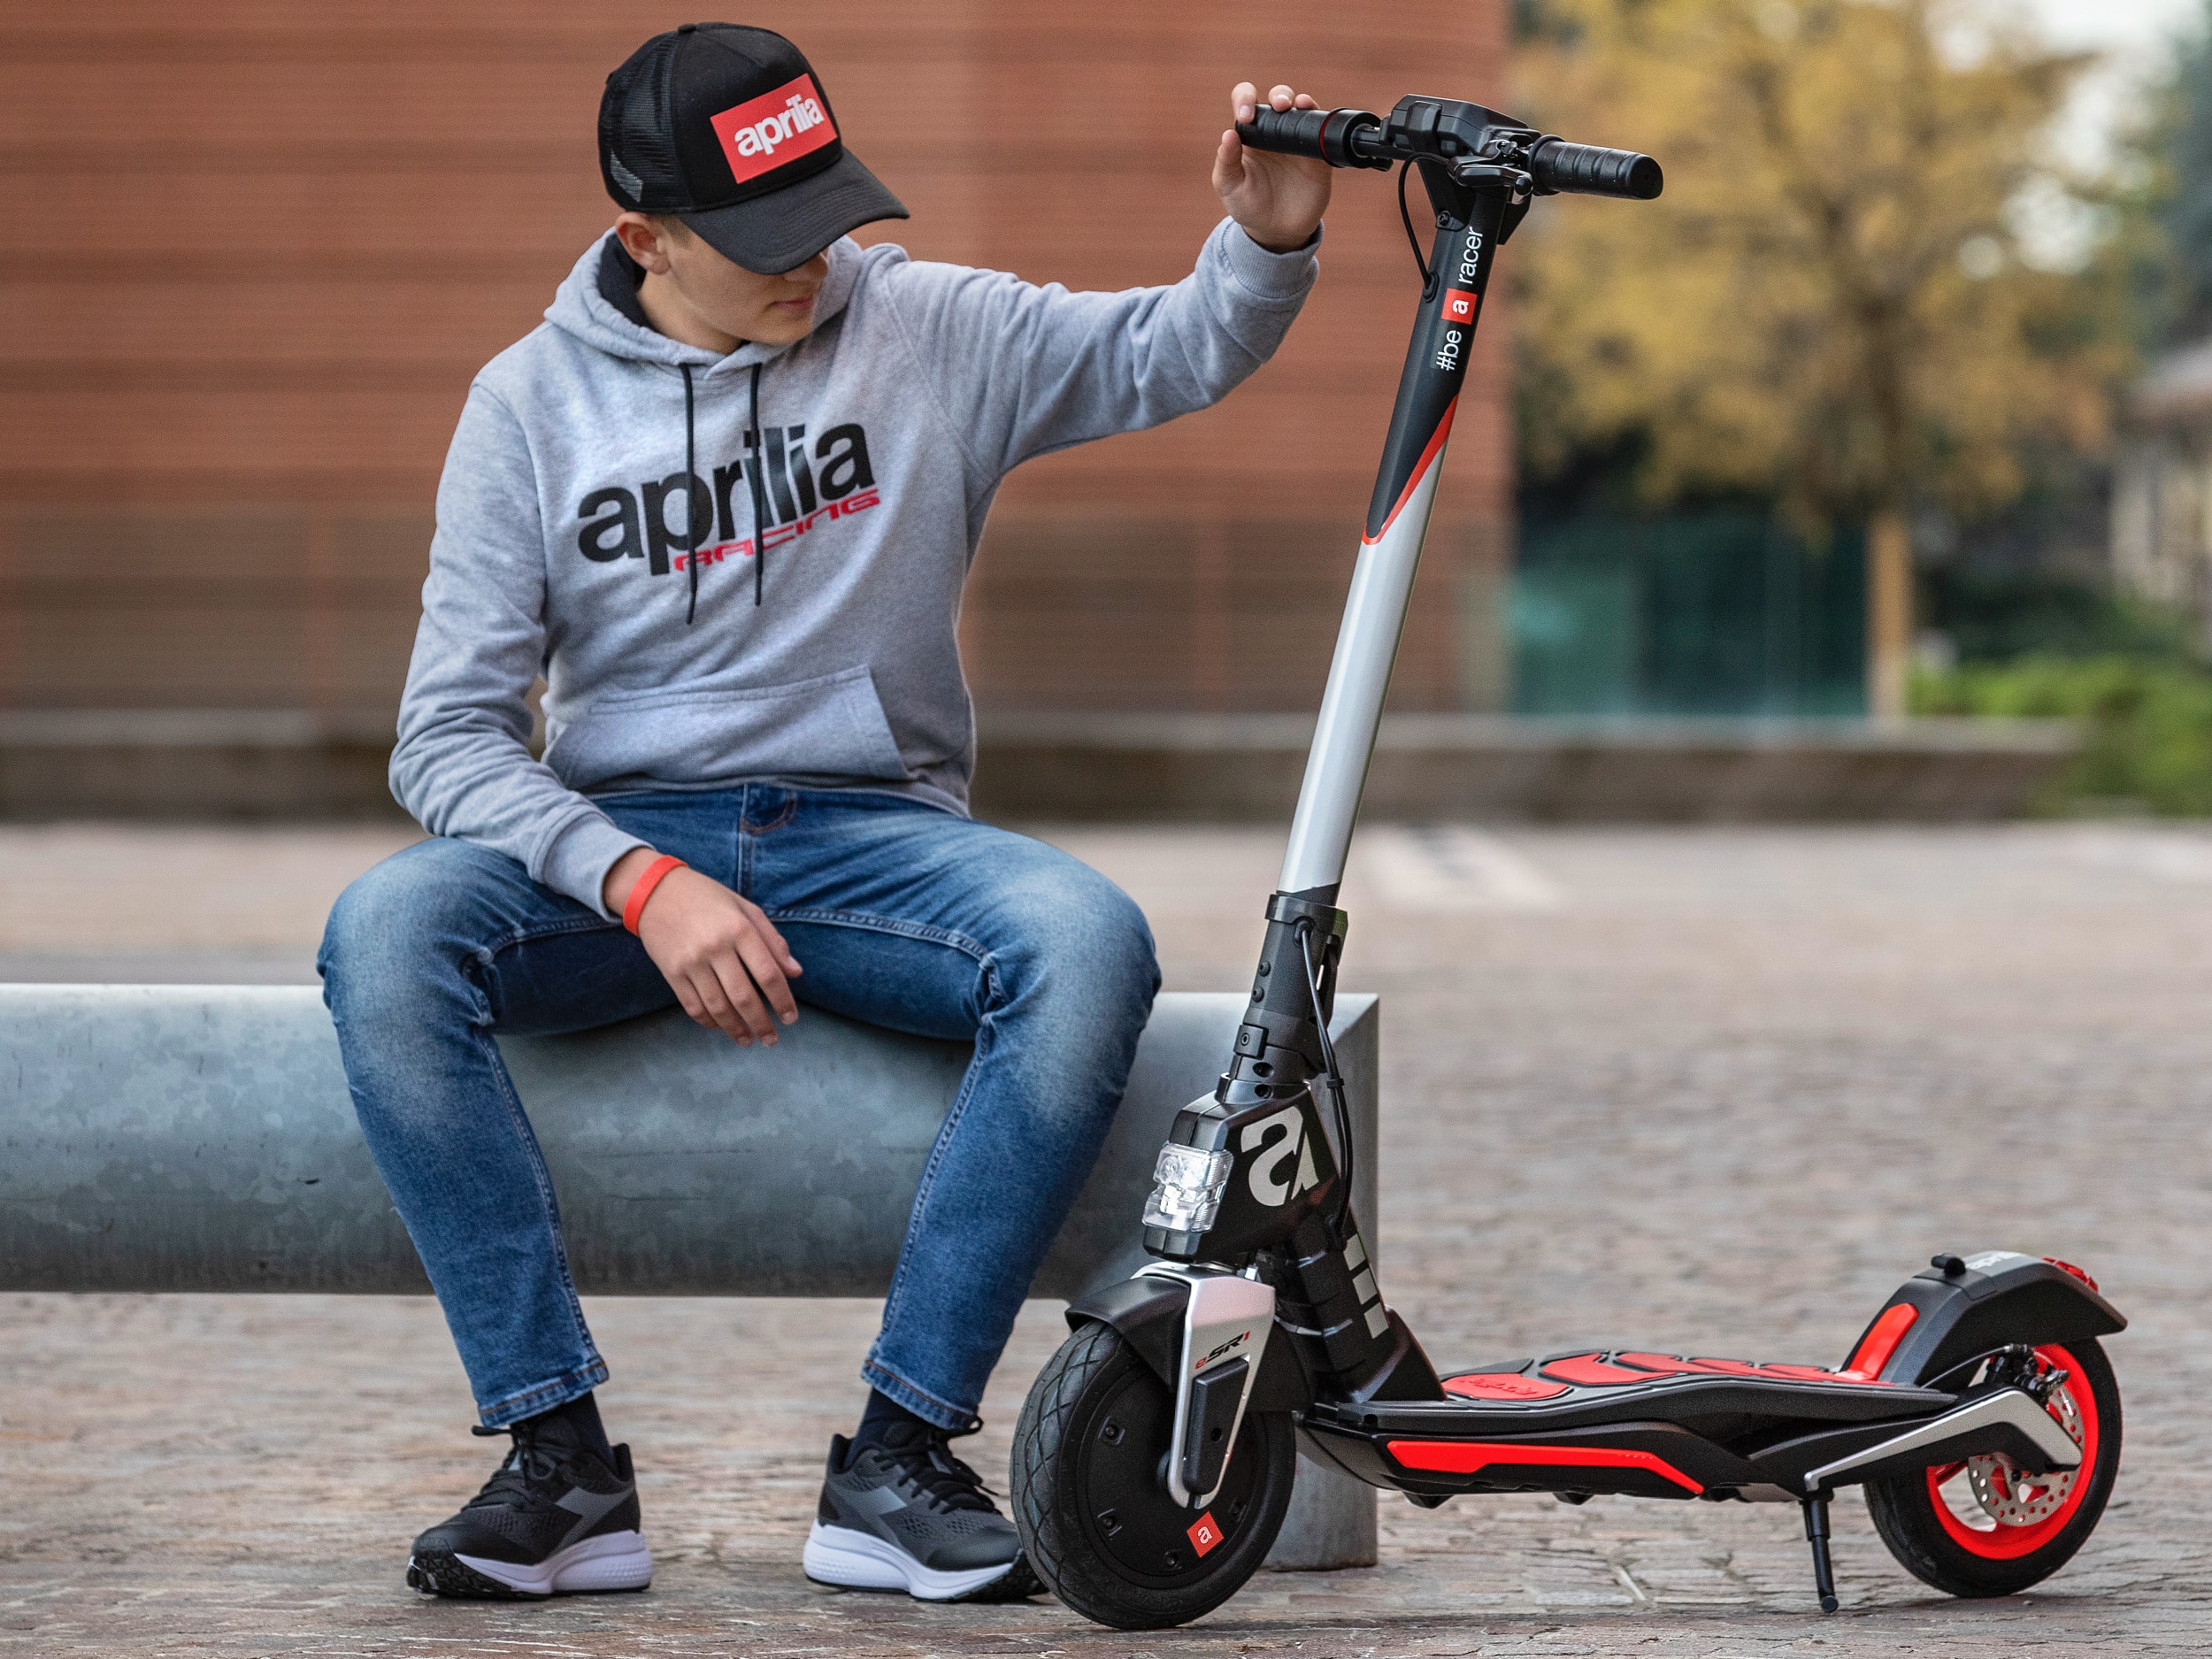 APRILIA SIGNS LICENSING AGREEMENT WITH MT DISTRIBUTION FOR THE PRODUCTION AND MARKETING OF THE eSR1 ELECTRIC SCOOTER